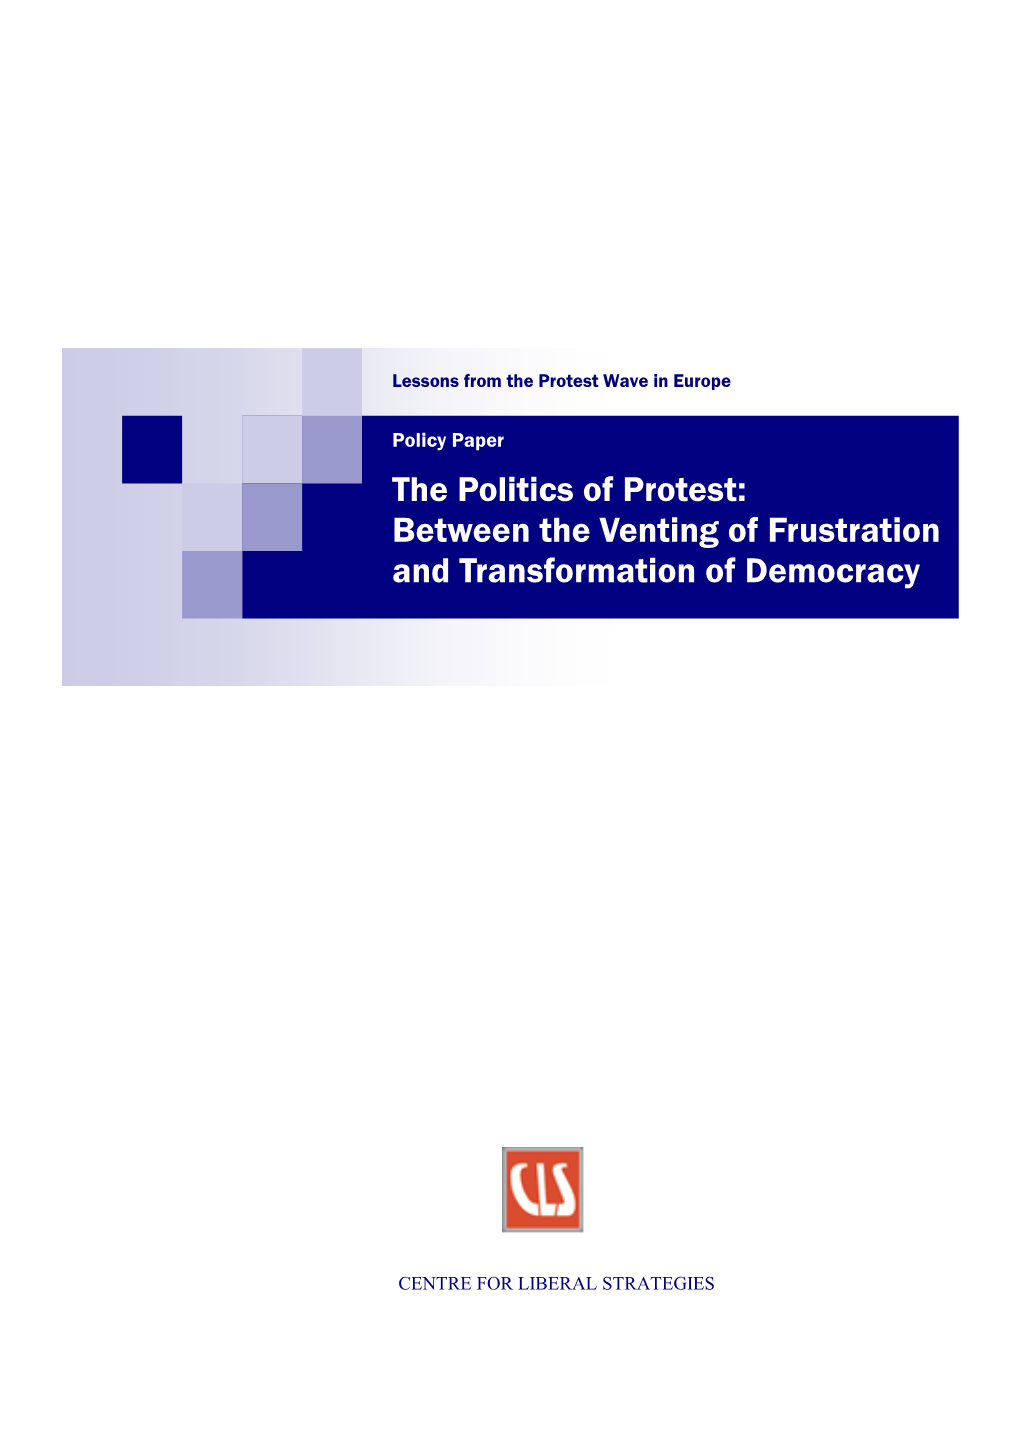 The Politics of Protest: Between the Venting of Frustration and Transformation of Democracy